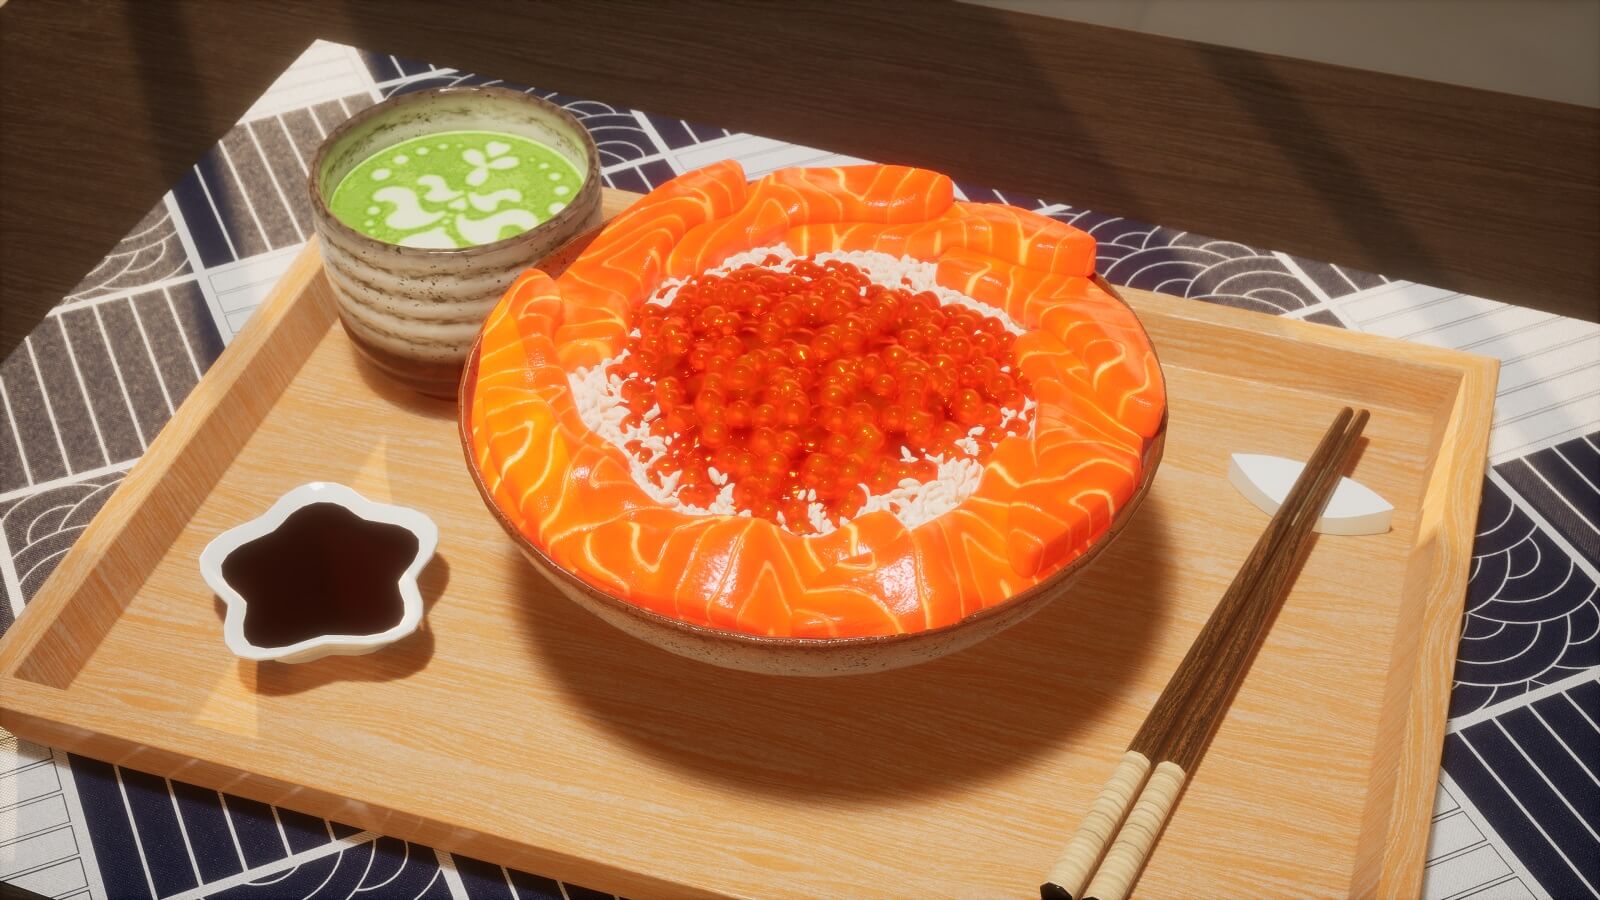 Top-down angled view of a meal on a tray, featuring salmon roe and sashimi